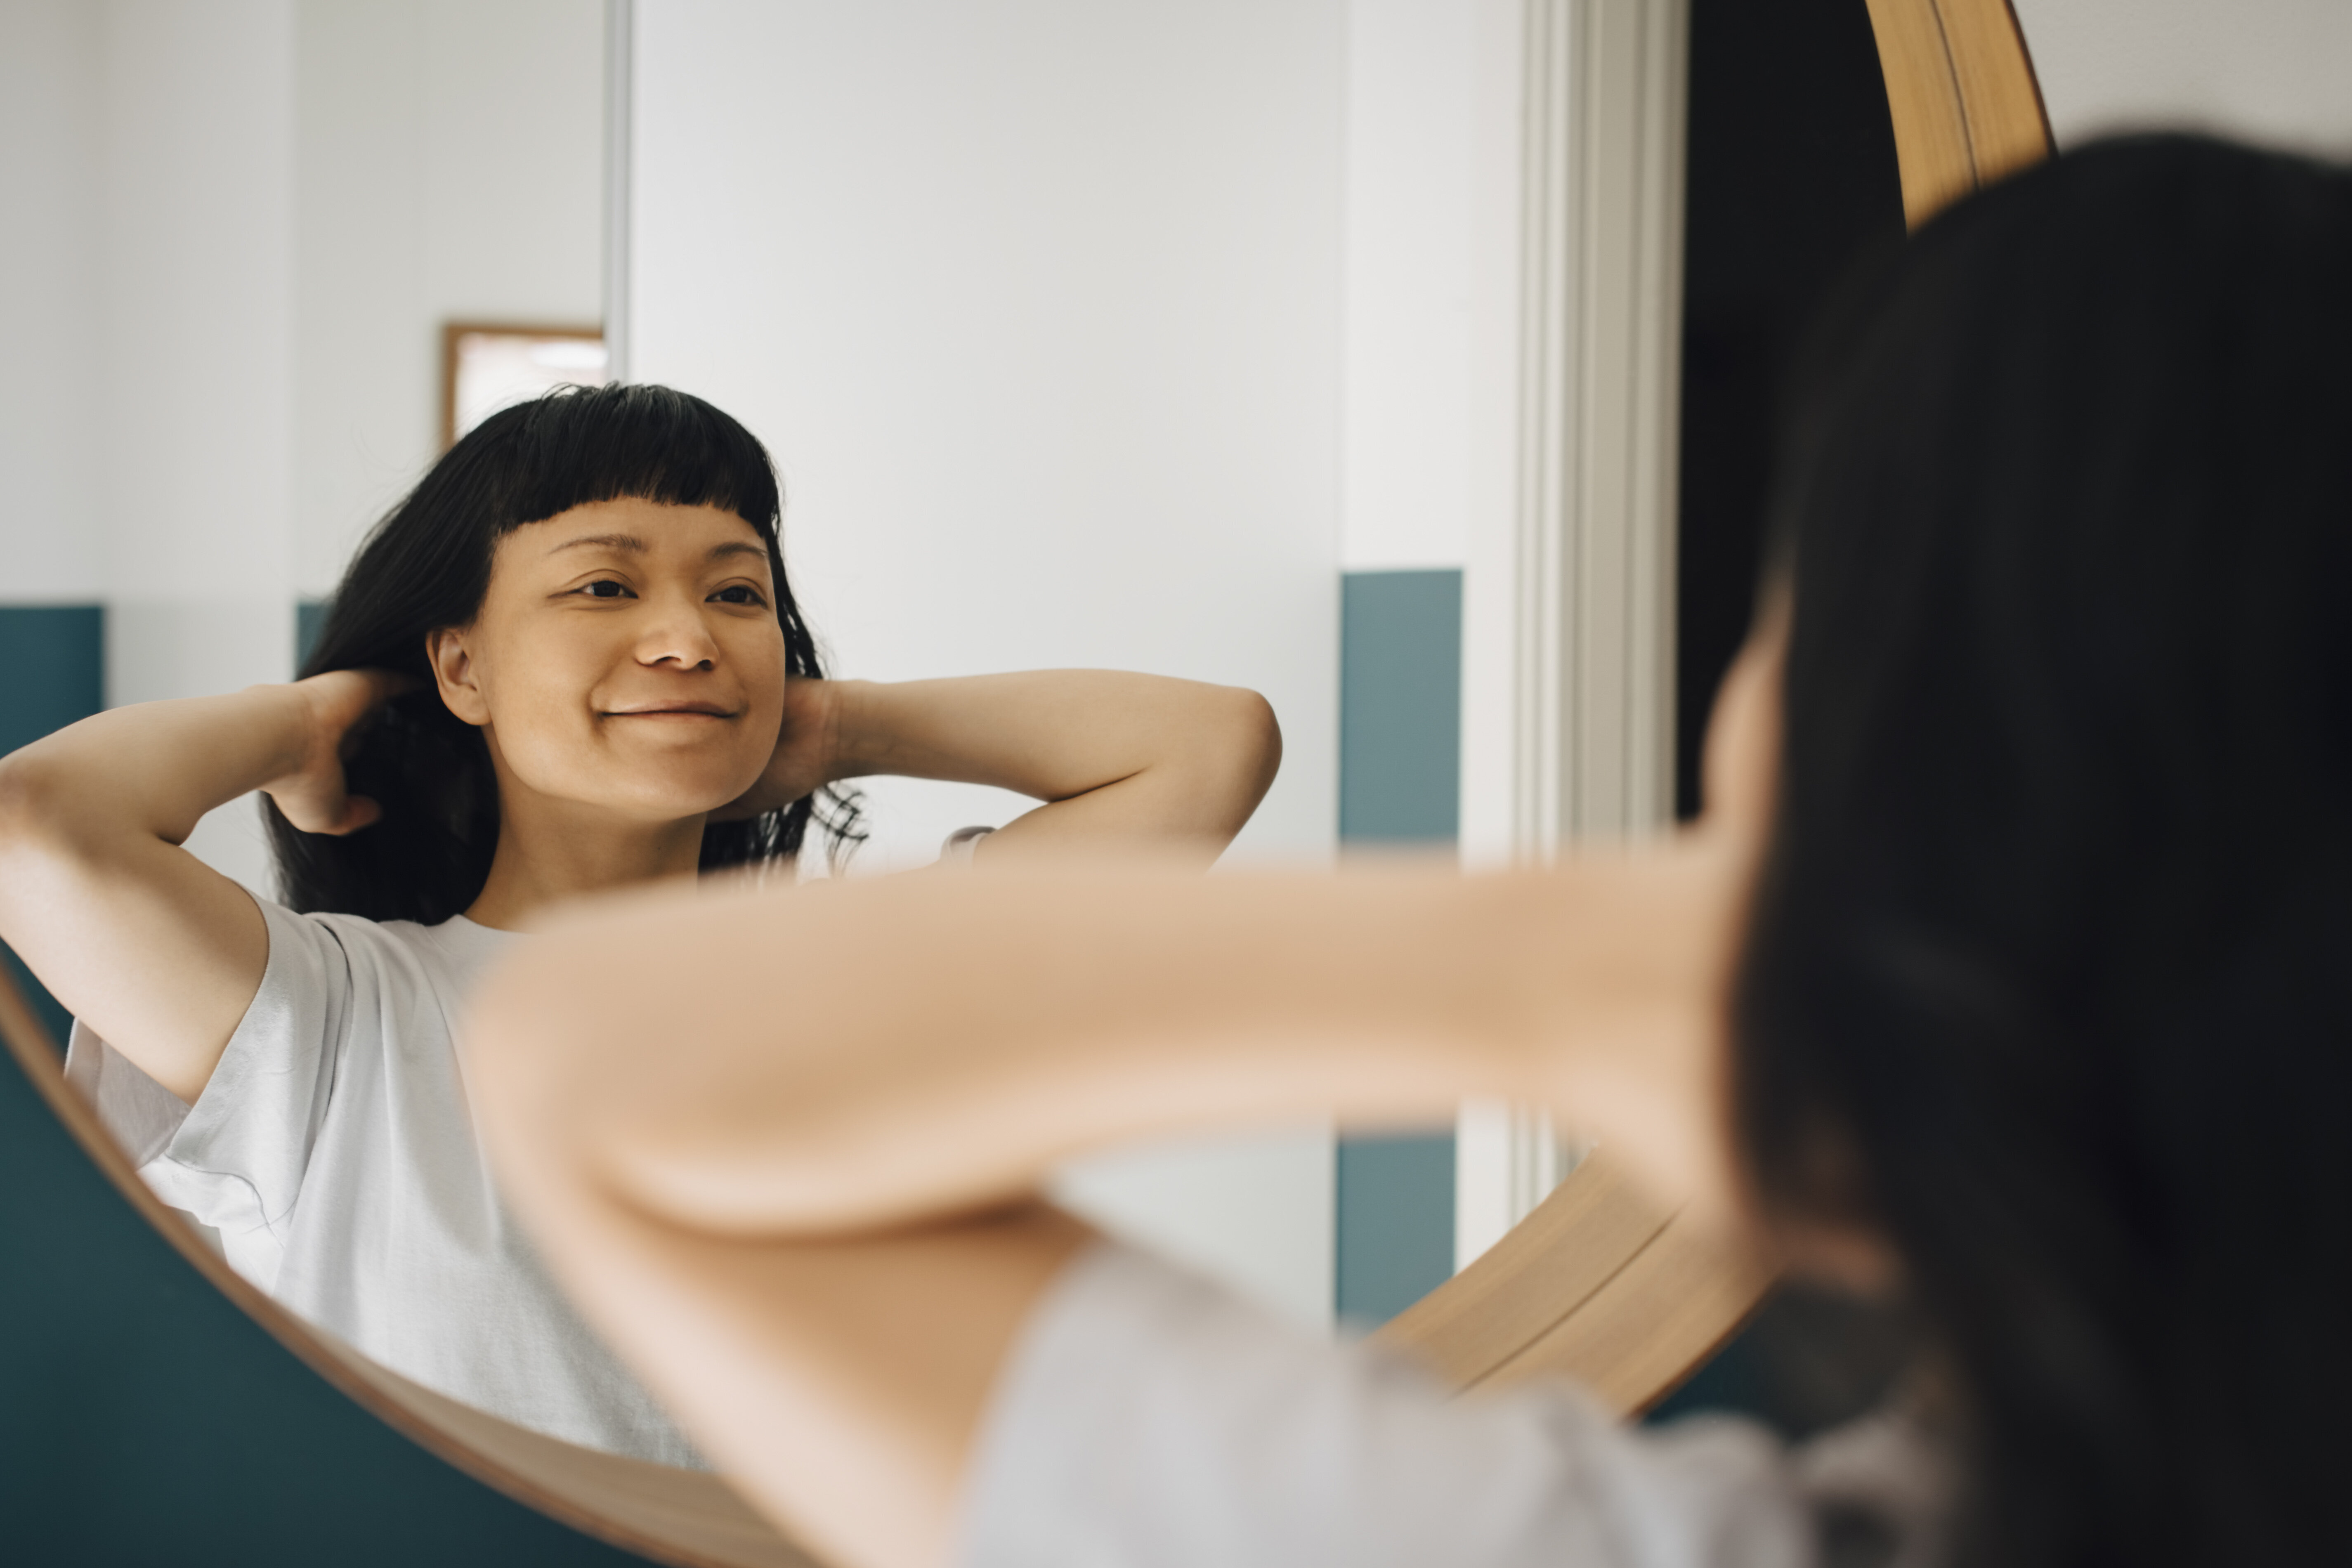 Person smiling at their reflection in a mirror, hands behind head, promoting self-love and positivity